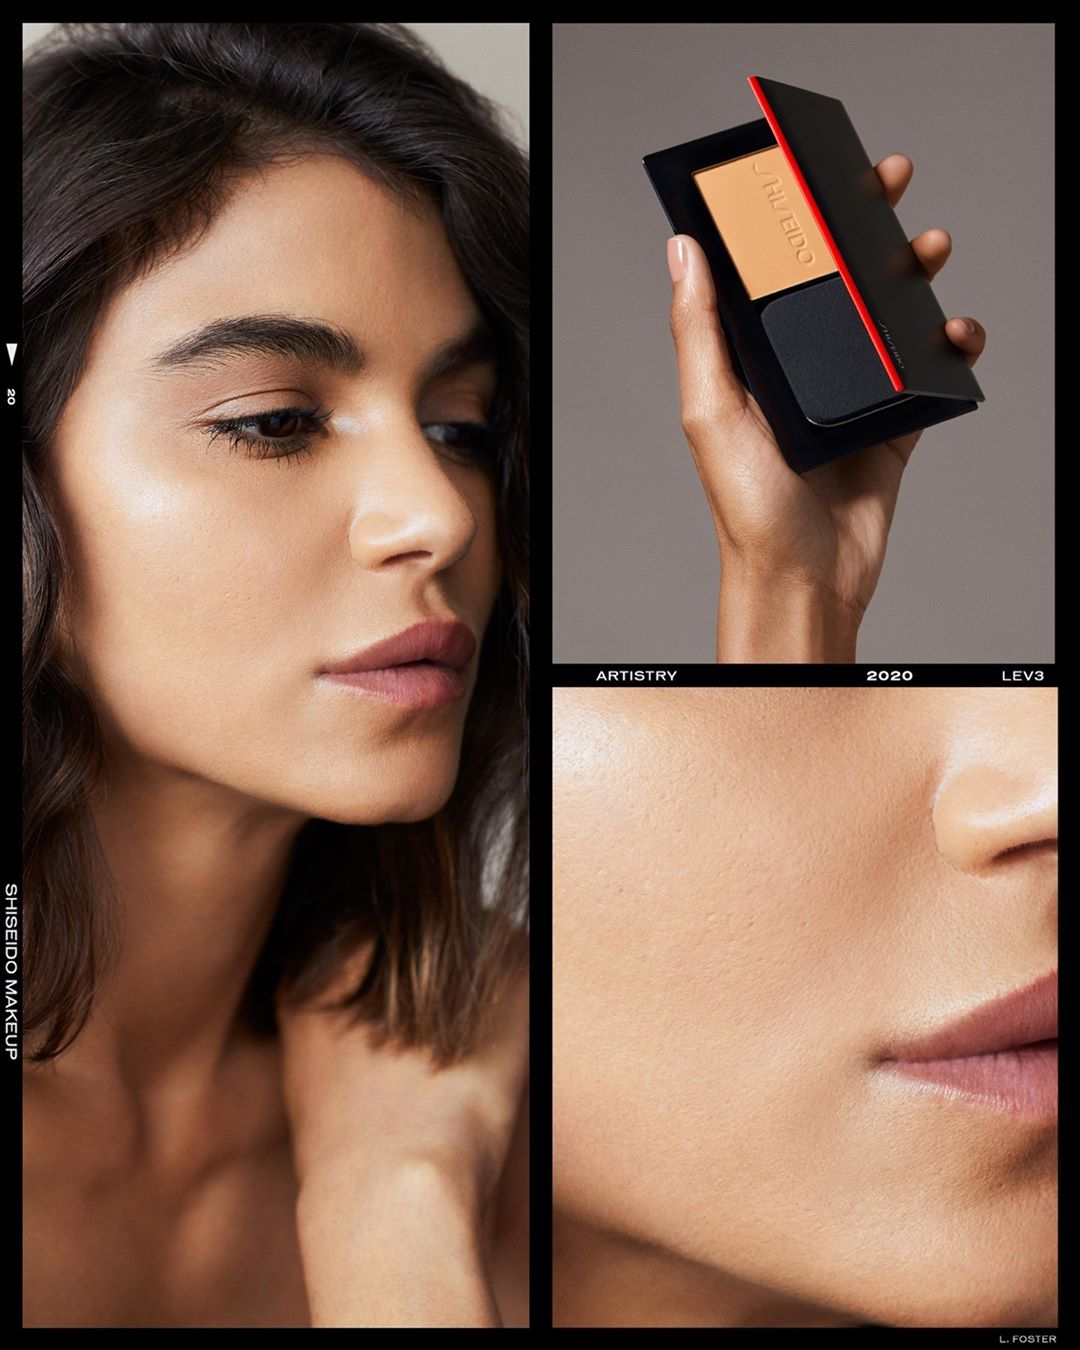 SHISEIDO - Synchro Skin Self-Refreshing Custom Finish Powder Foundation allows you to control your level of long-lasting coverage. Use it with a damp sponge to create a crease-proof canvas or buff acr...